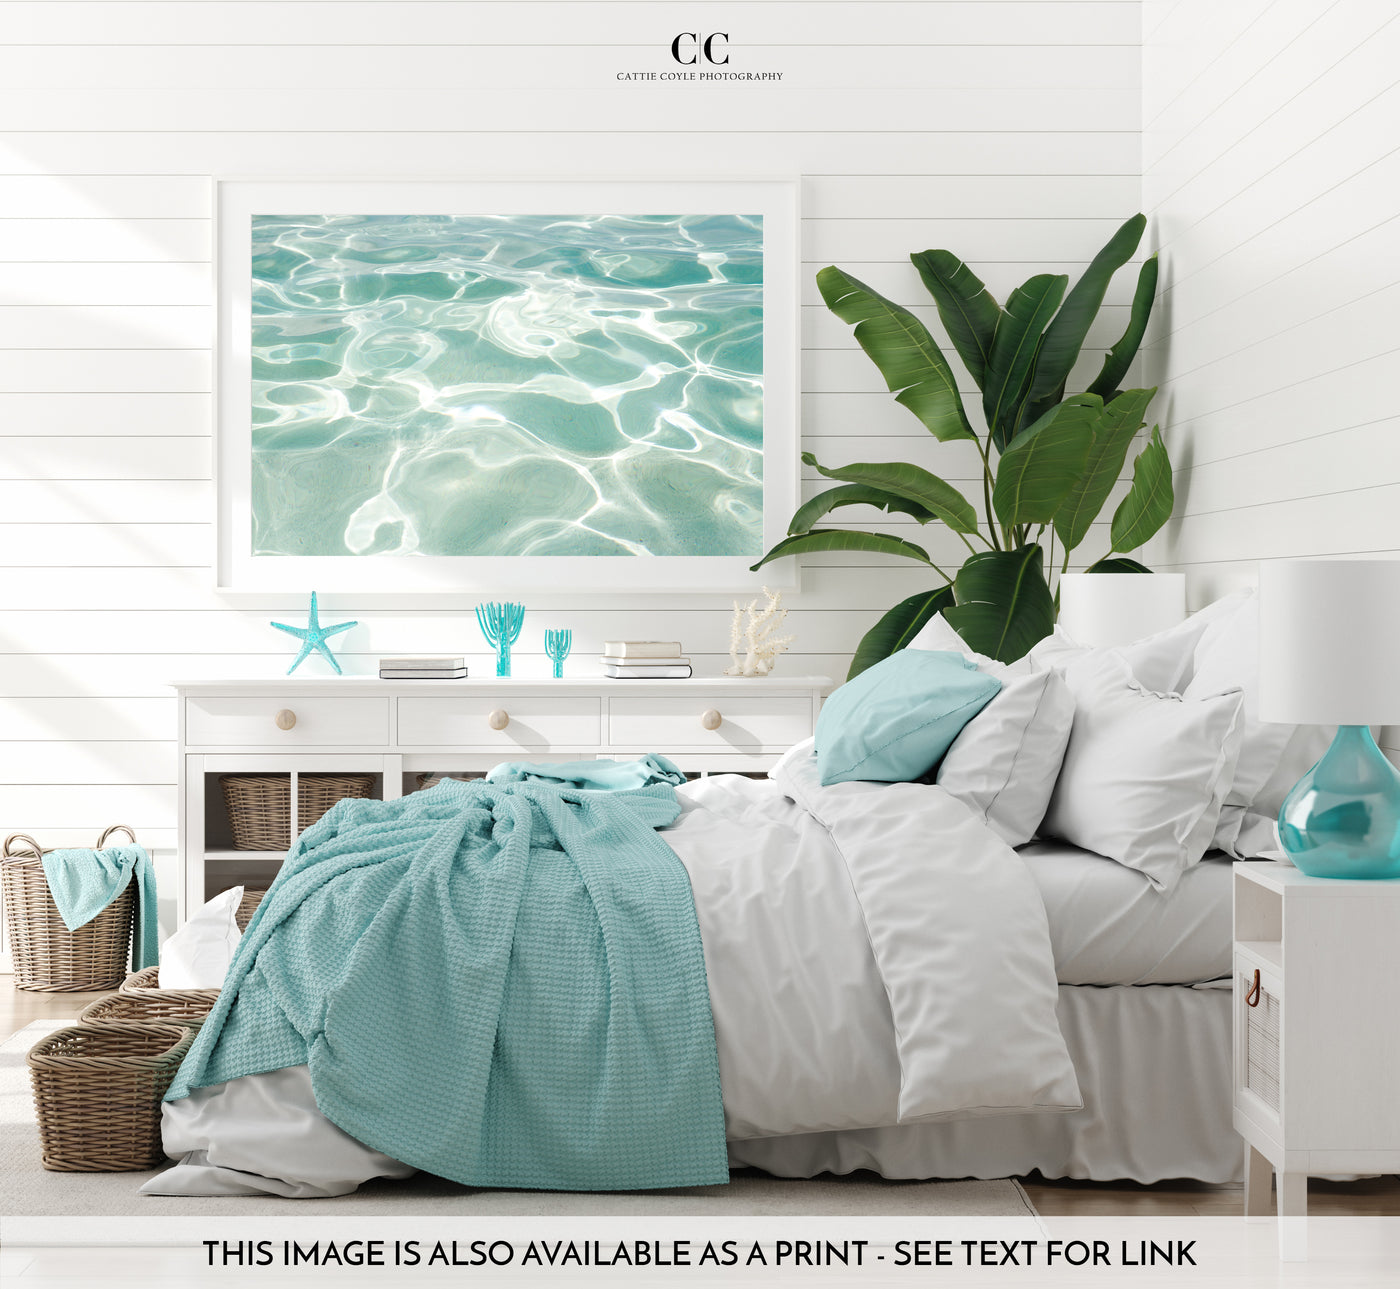 Caribbean Sea - Large fine art print by Cattie Coyle Photography in beach house bedroom